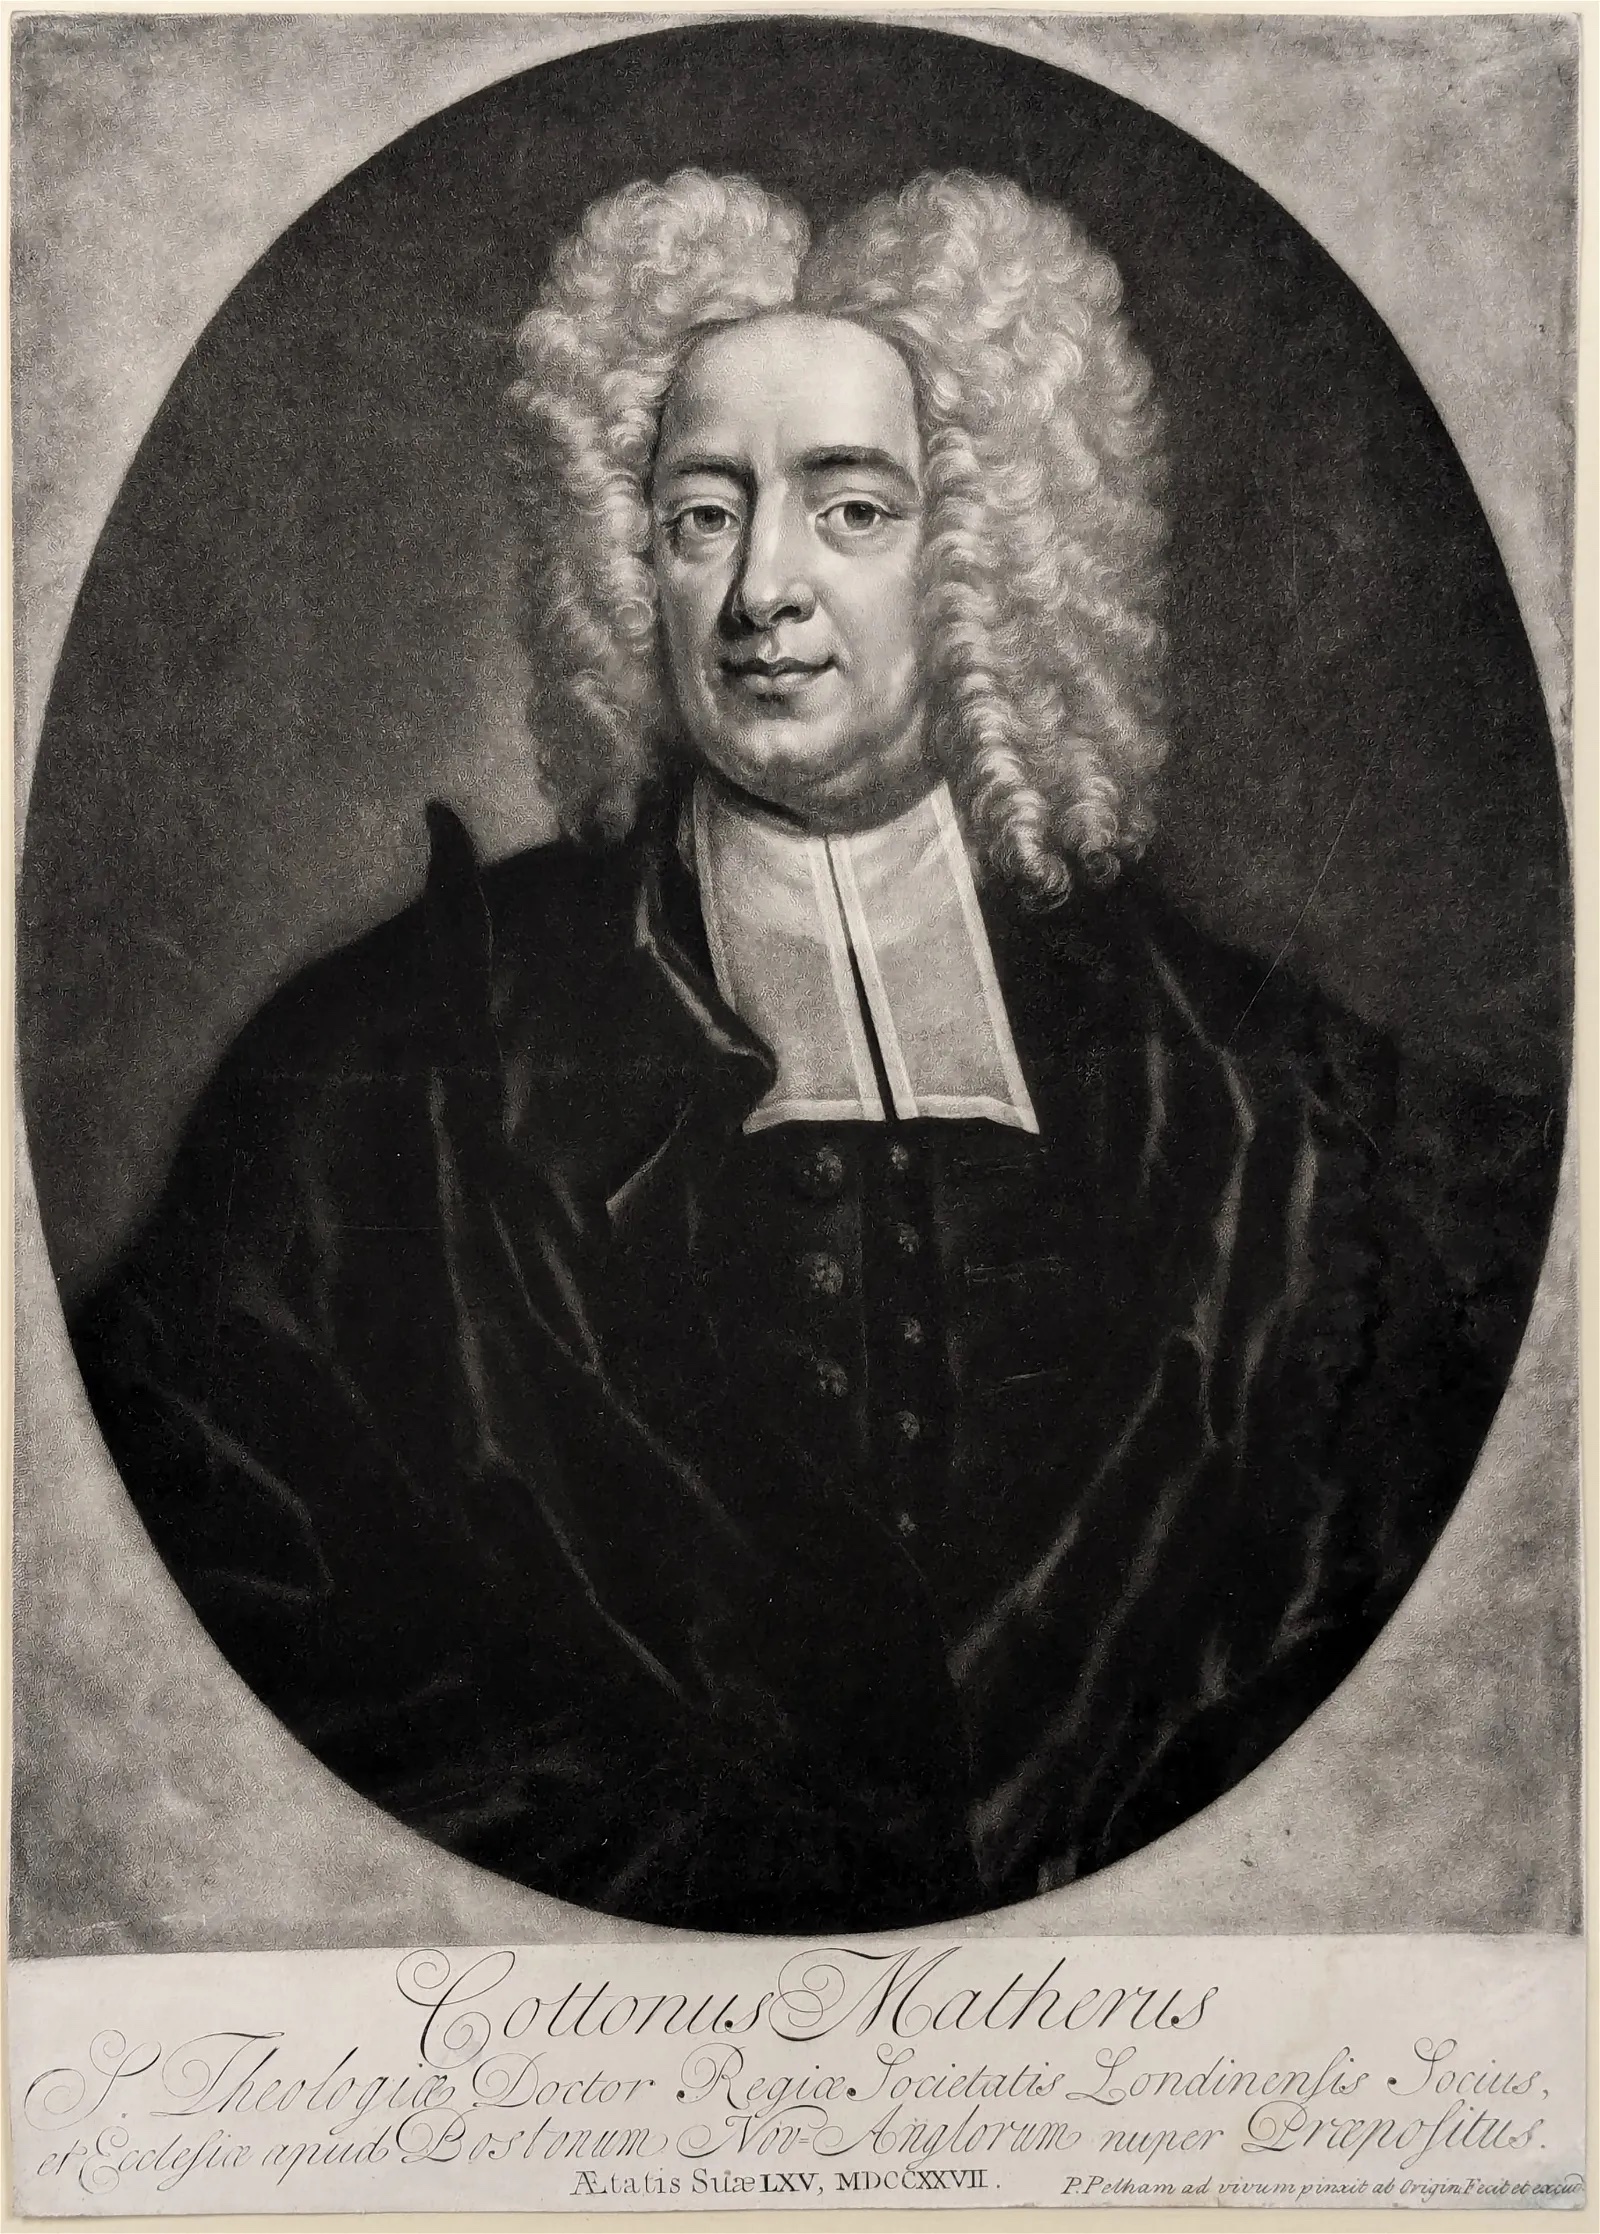 Peter Pelham, 'Cotton Mather', which sold for $4,200 ($5,334 with buyer's premium) at Tremont.
